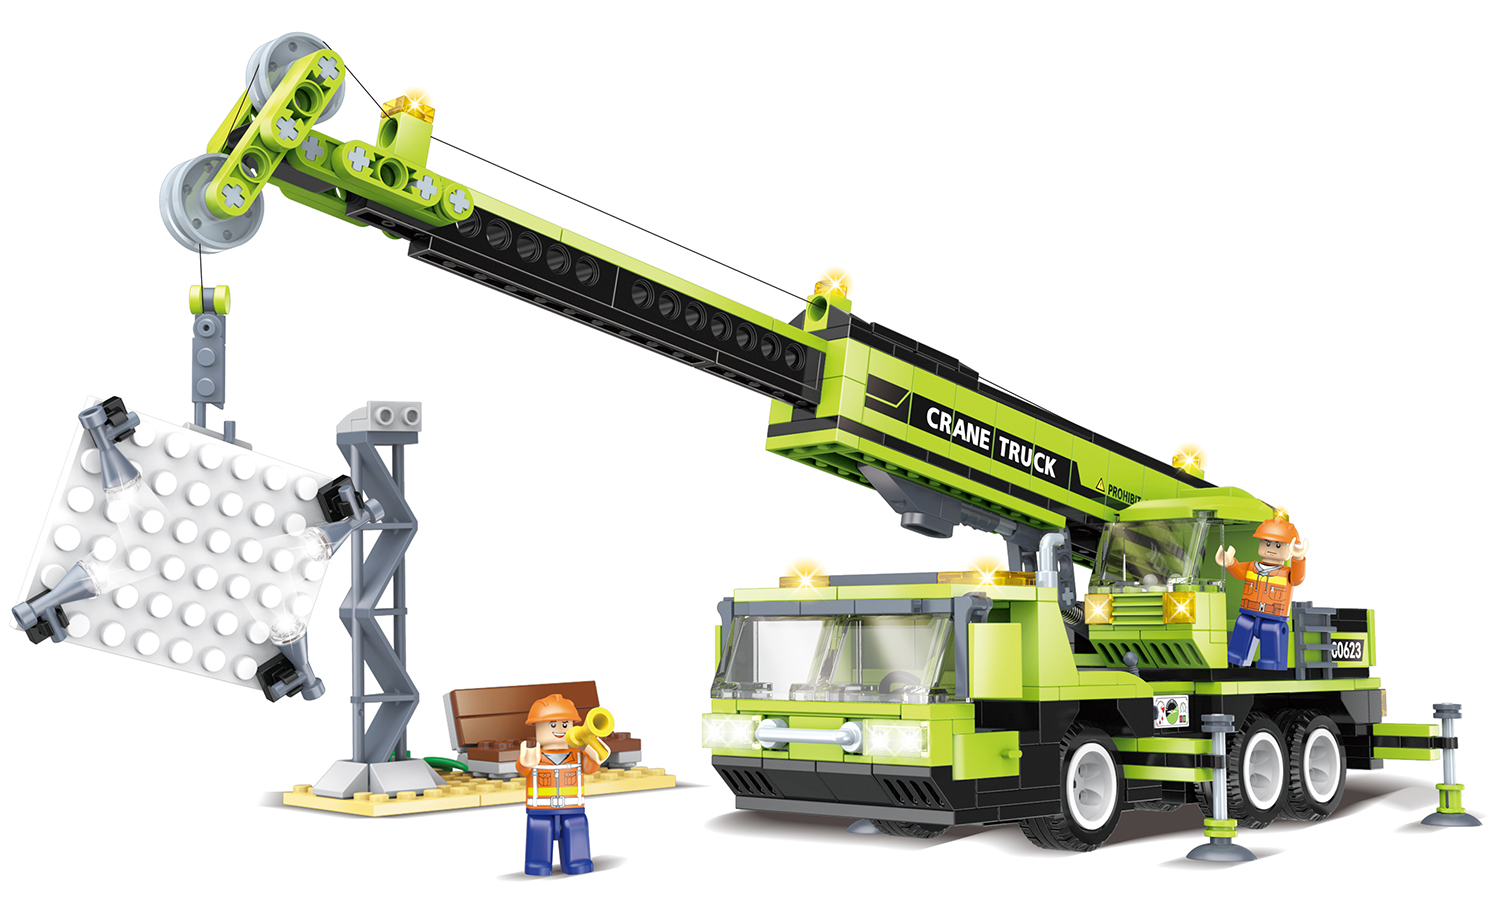 WOMA TOYS Compatible major brands bricks 2 in 1 Crane Channel Construction site educational small building blocks toys model